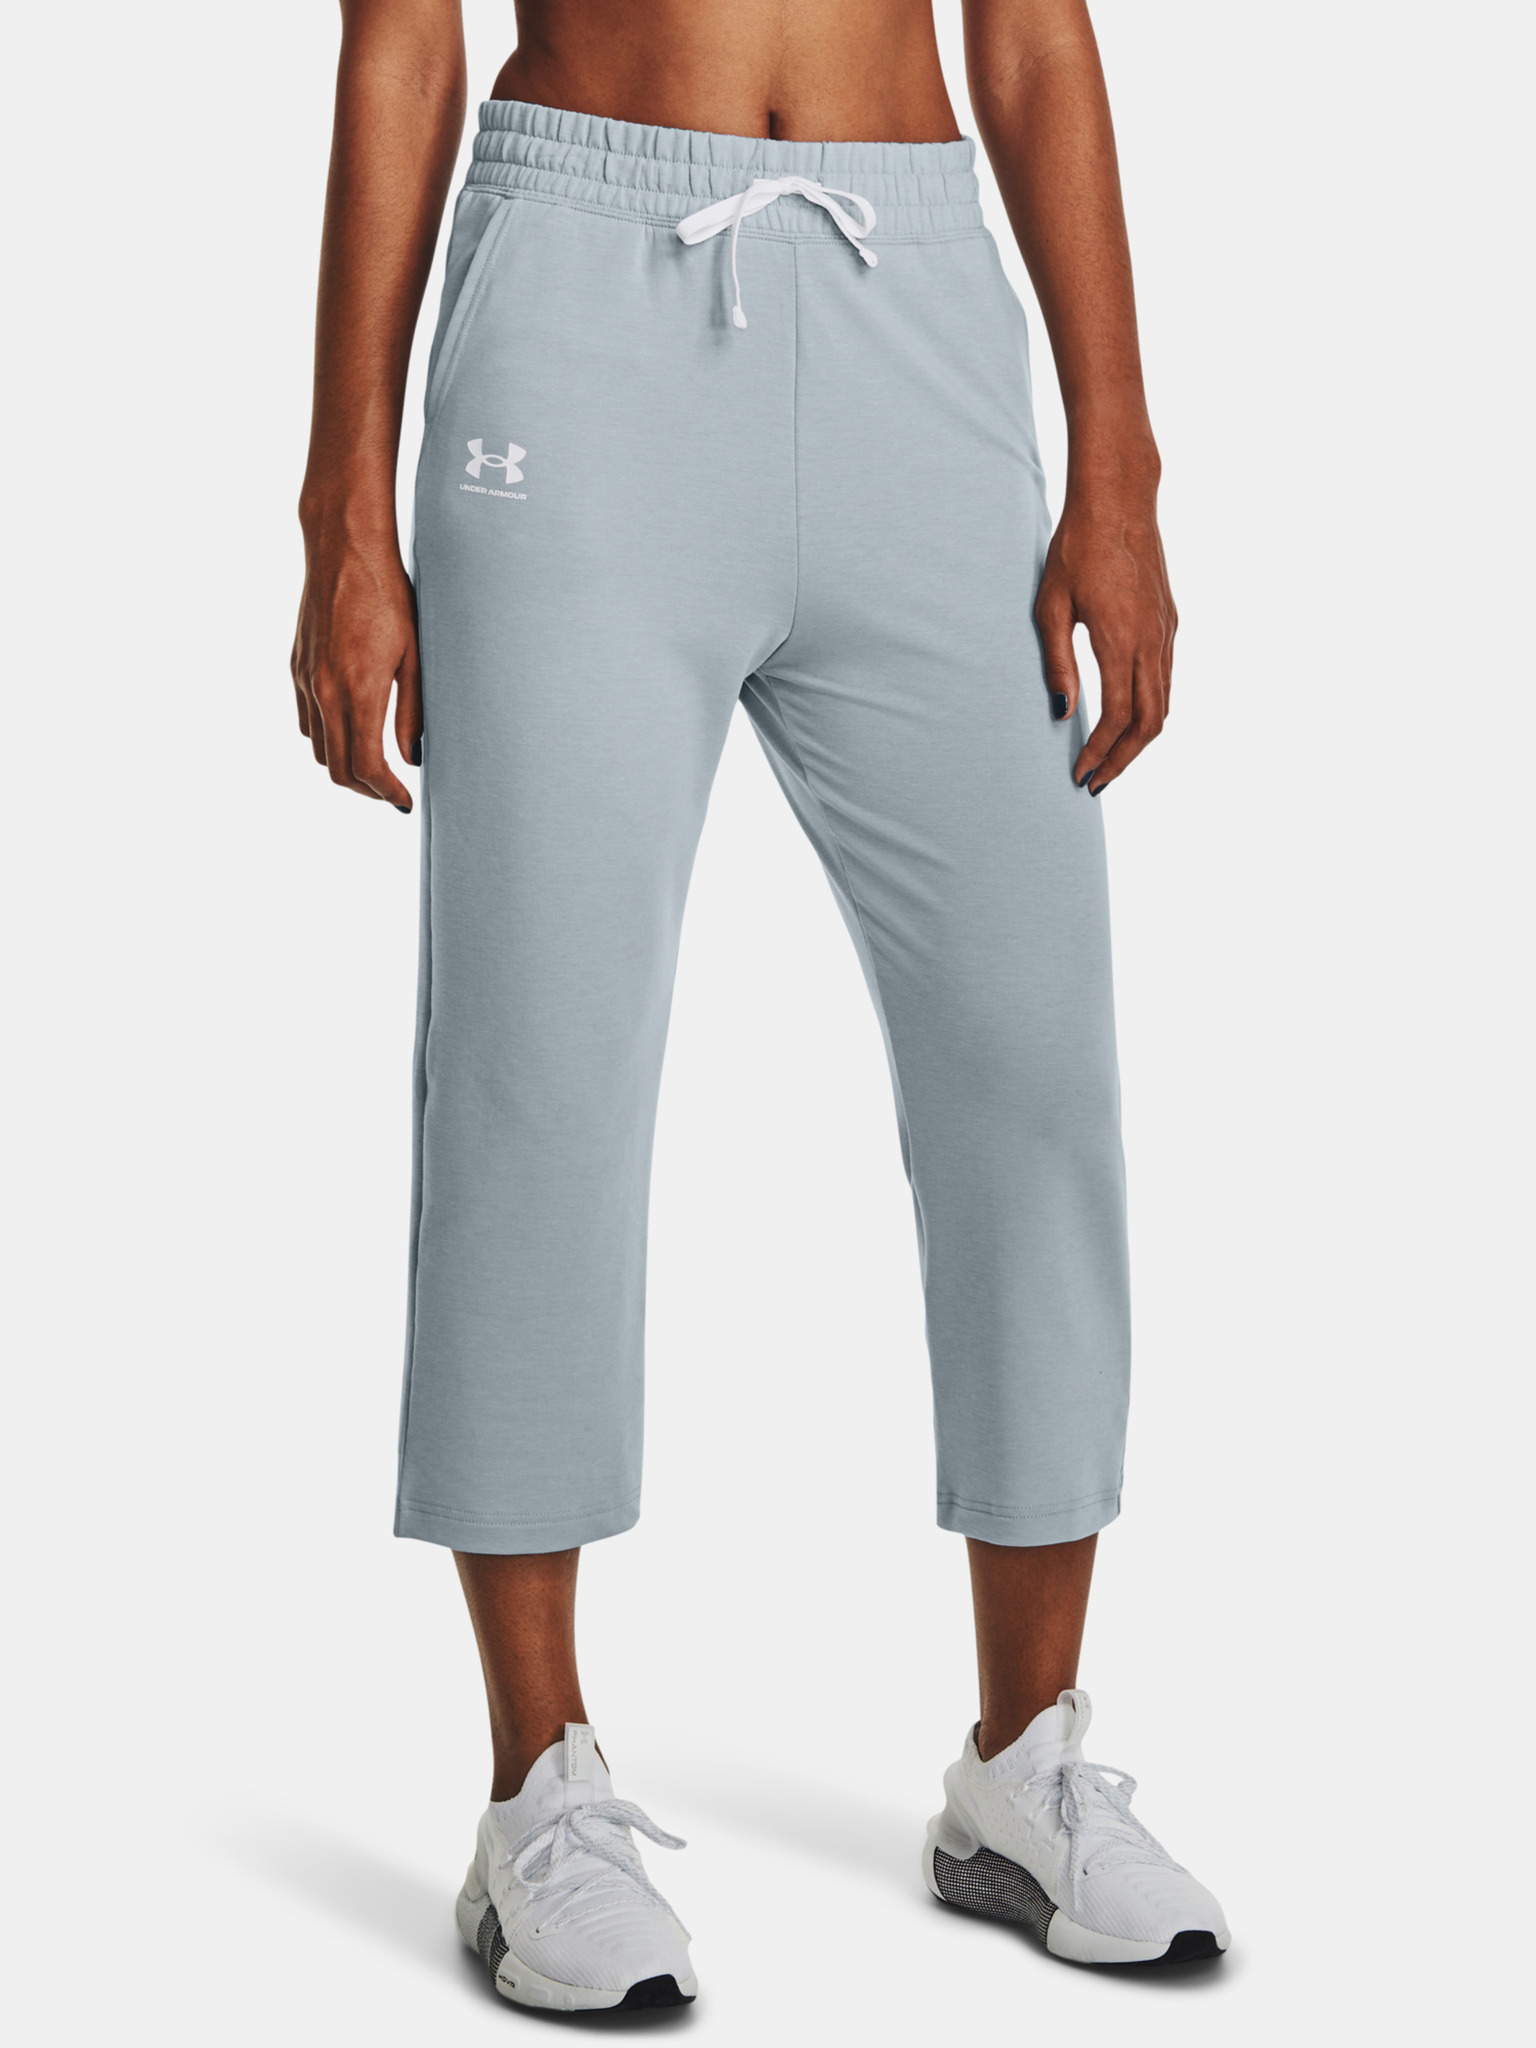 UNDER ARMOUR Women's UA Rival French Terry Joggers NWT Mod Gray/Jet Gray  MEDIUM